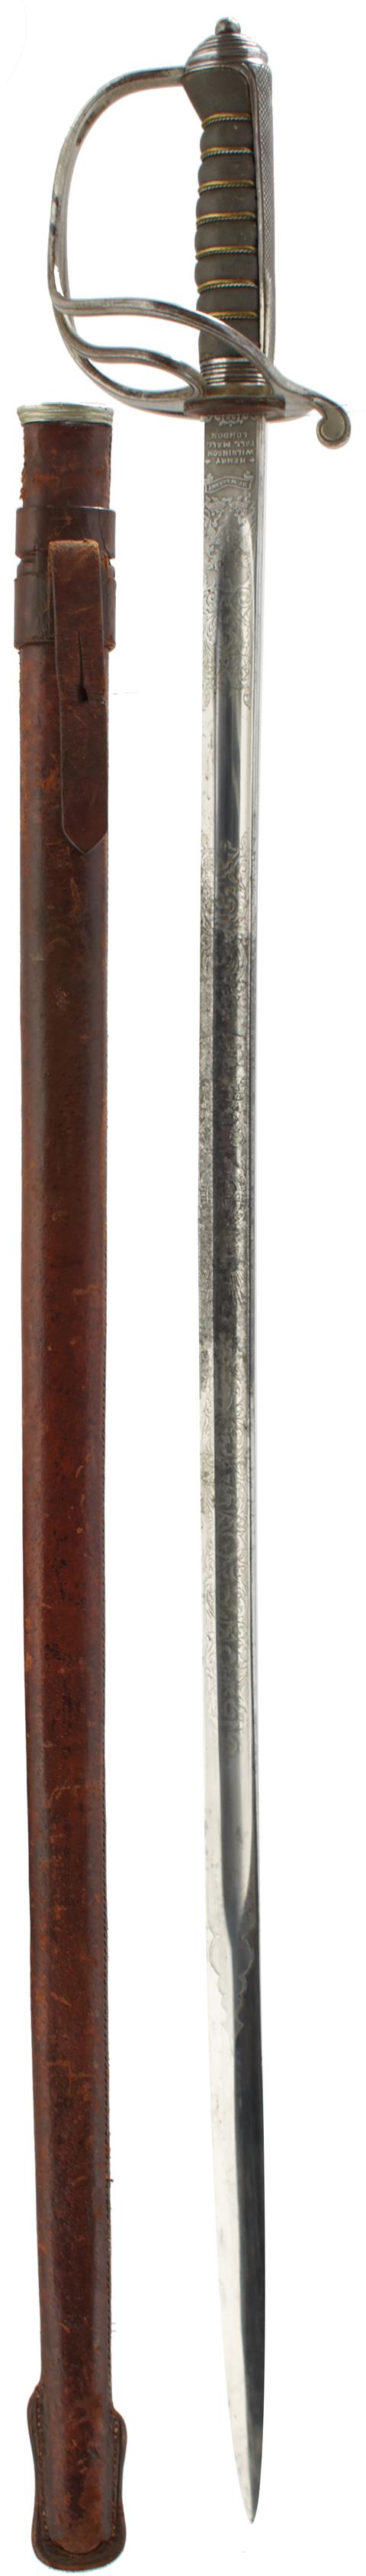 A ROYAL ARTILLERY OFFICER'S SWORD BY WILKINSON, 86cm slightly curved blade etched with scrolling